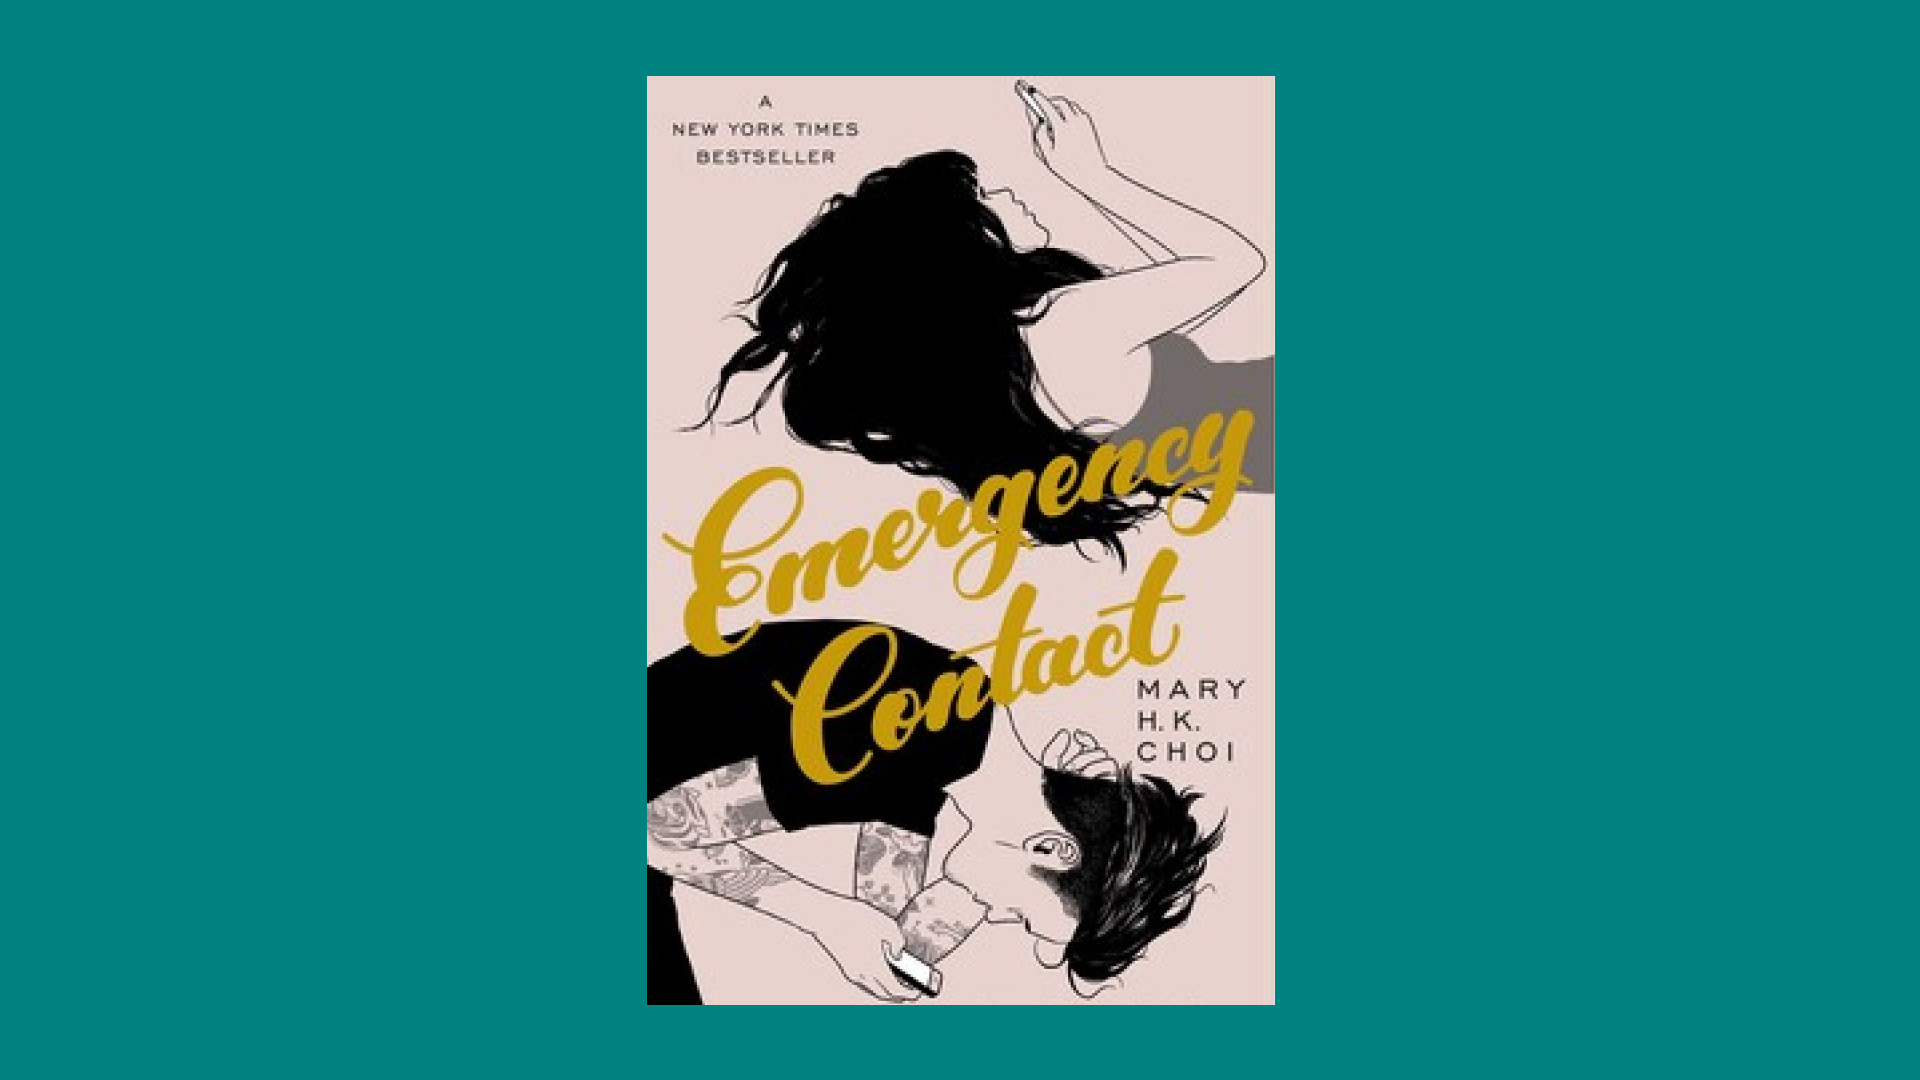 "Emergency Contact" by Mary H.K. Choi